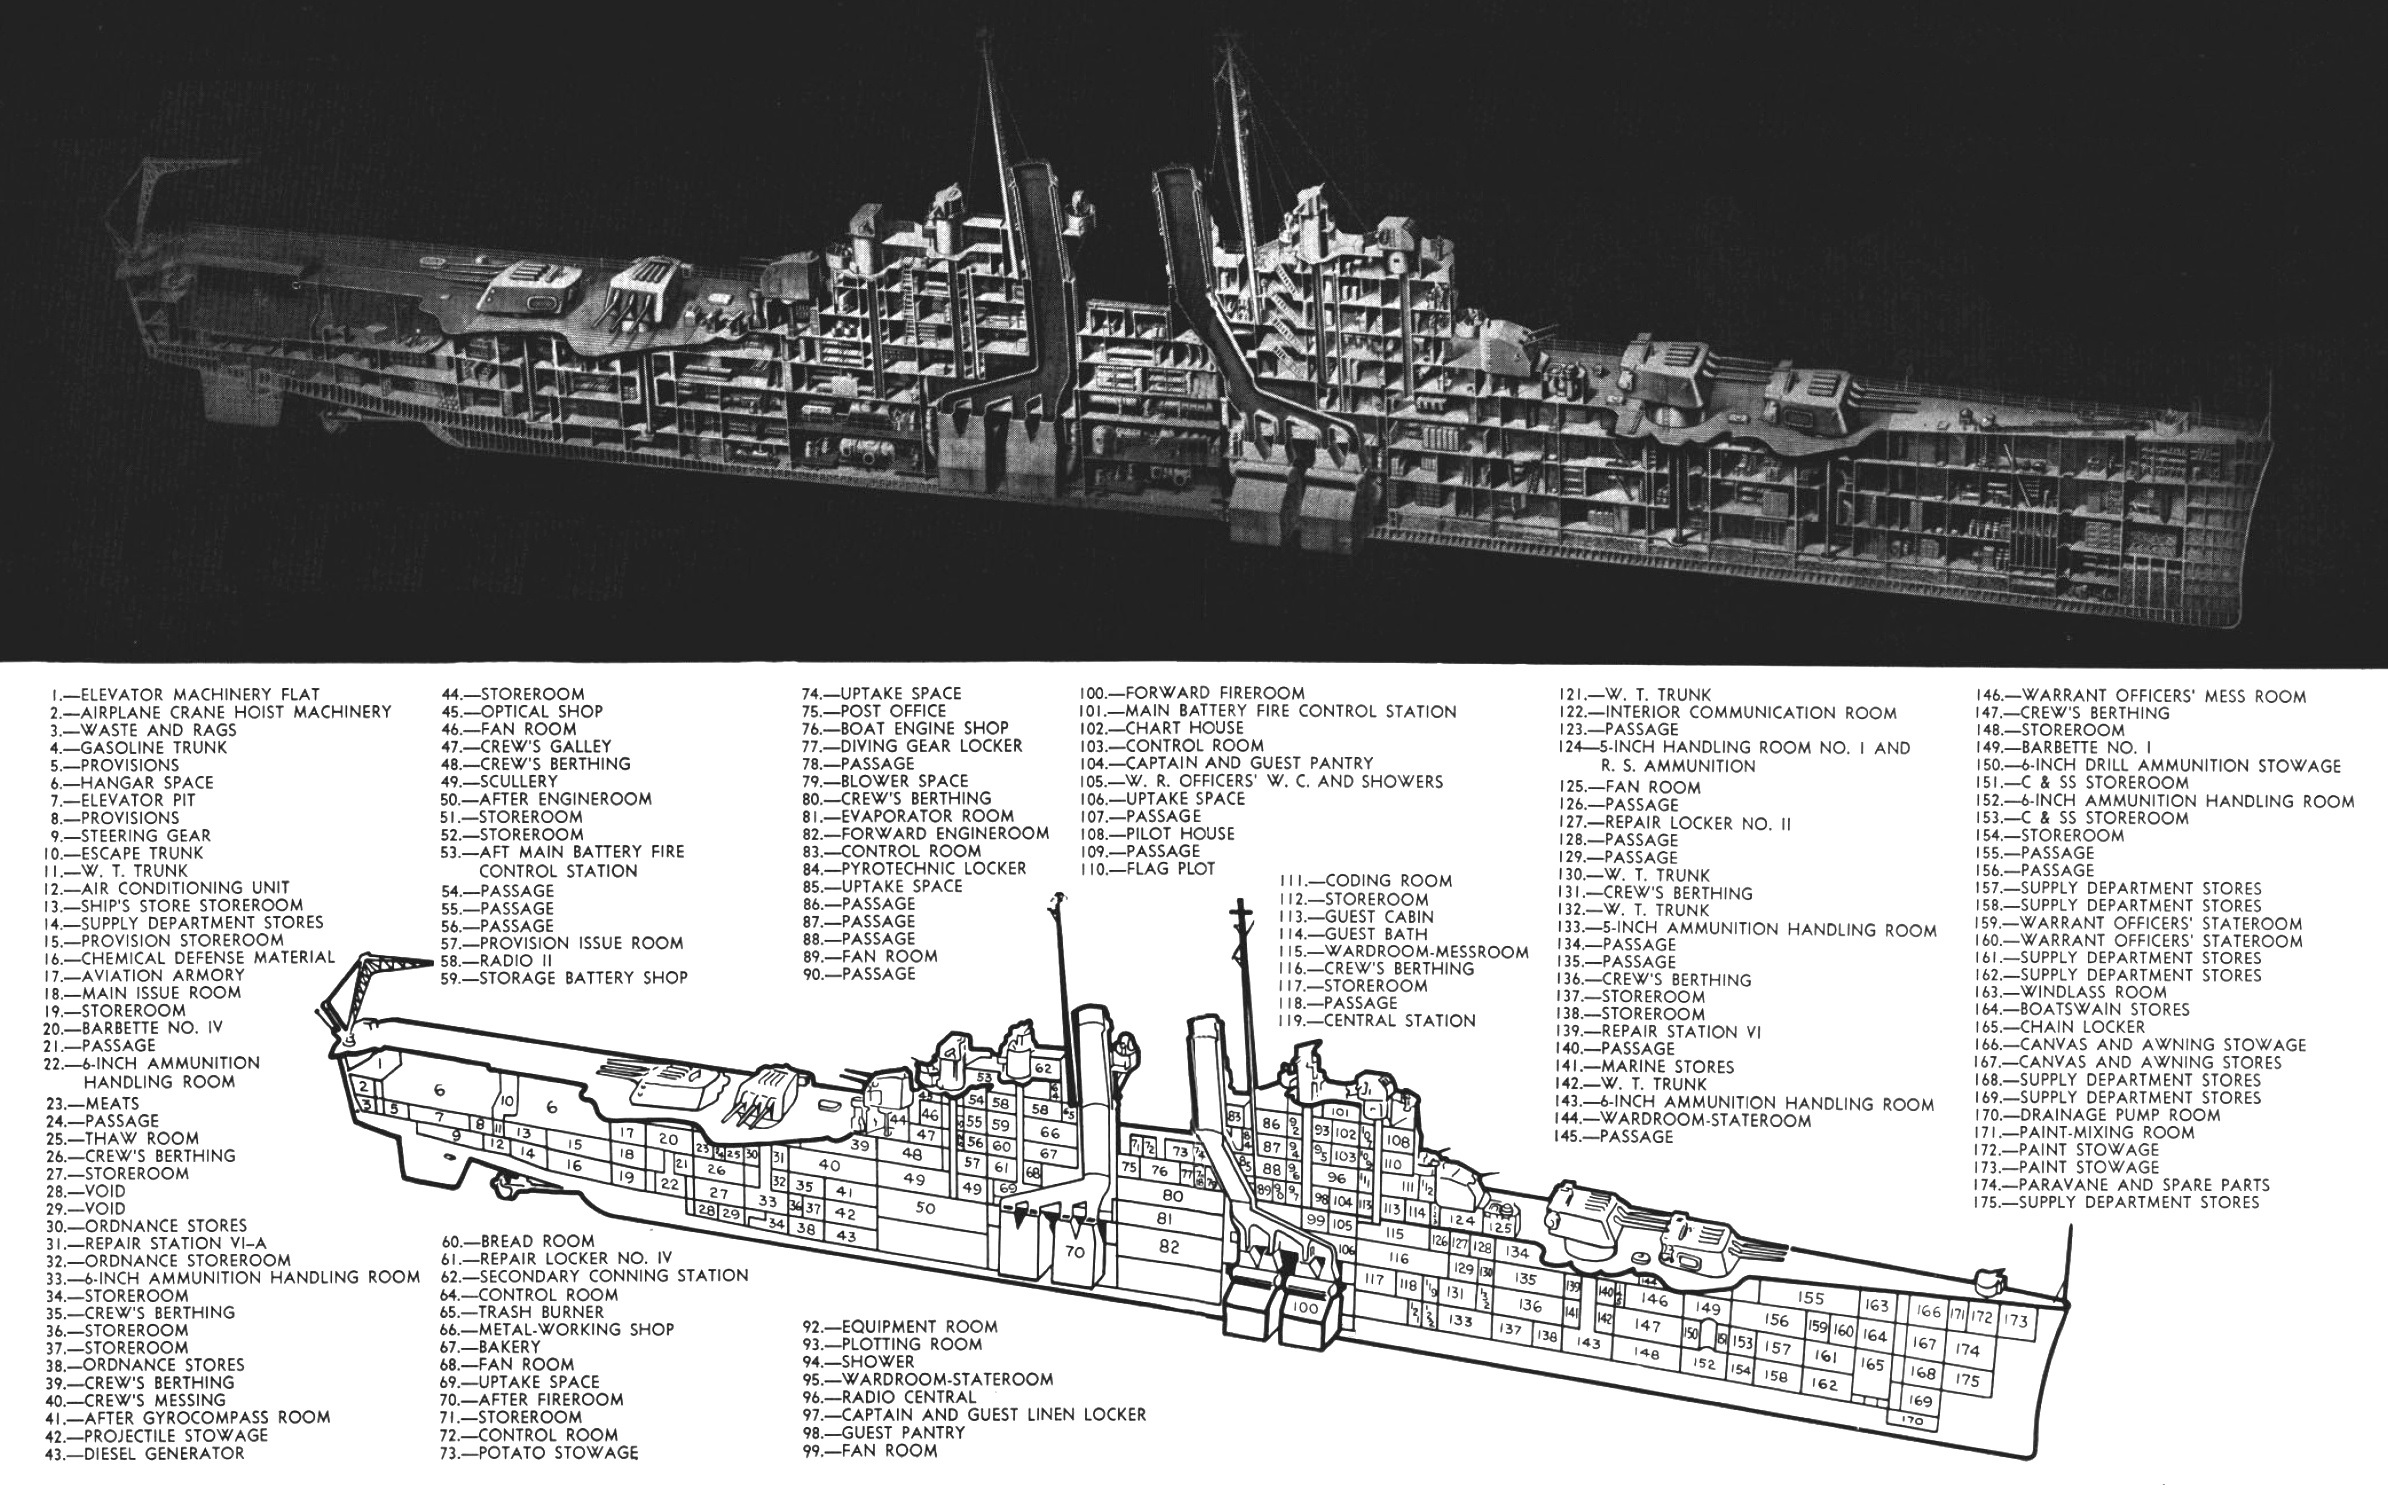 Technical drawing of the Cleveland-class light cruiser, as appeared in a 1958 issue of All-Hands magazine.